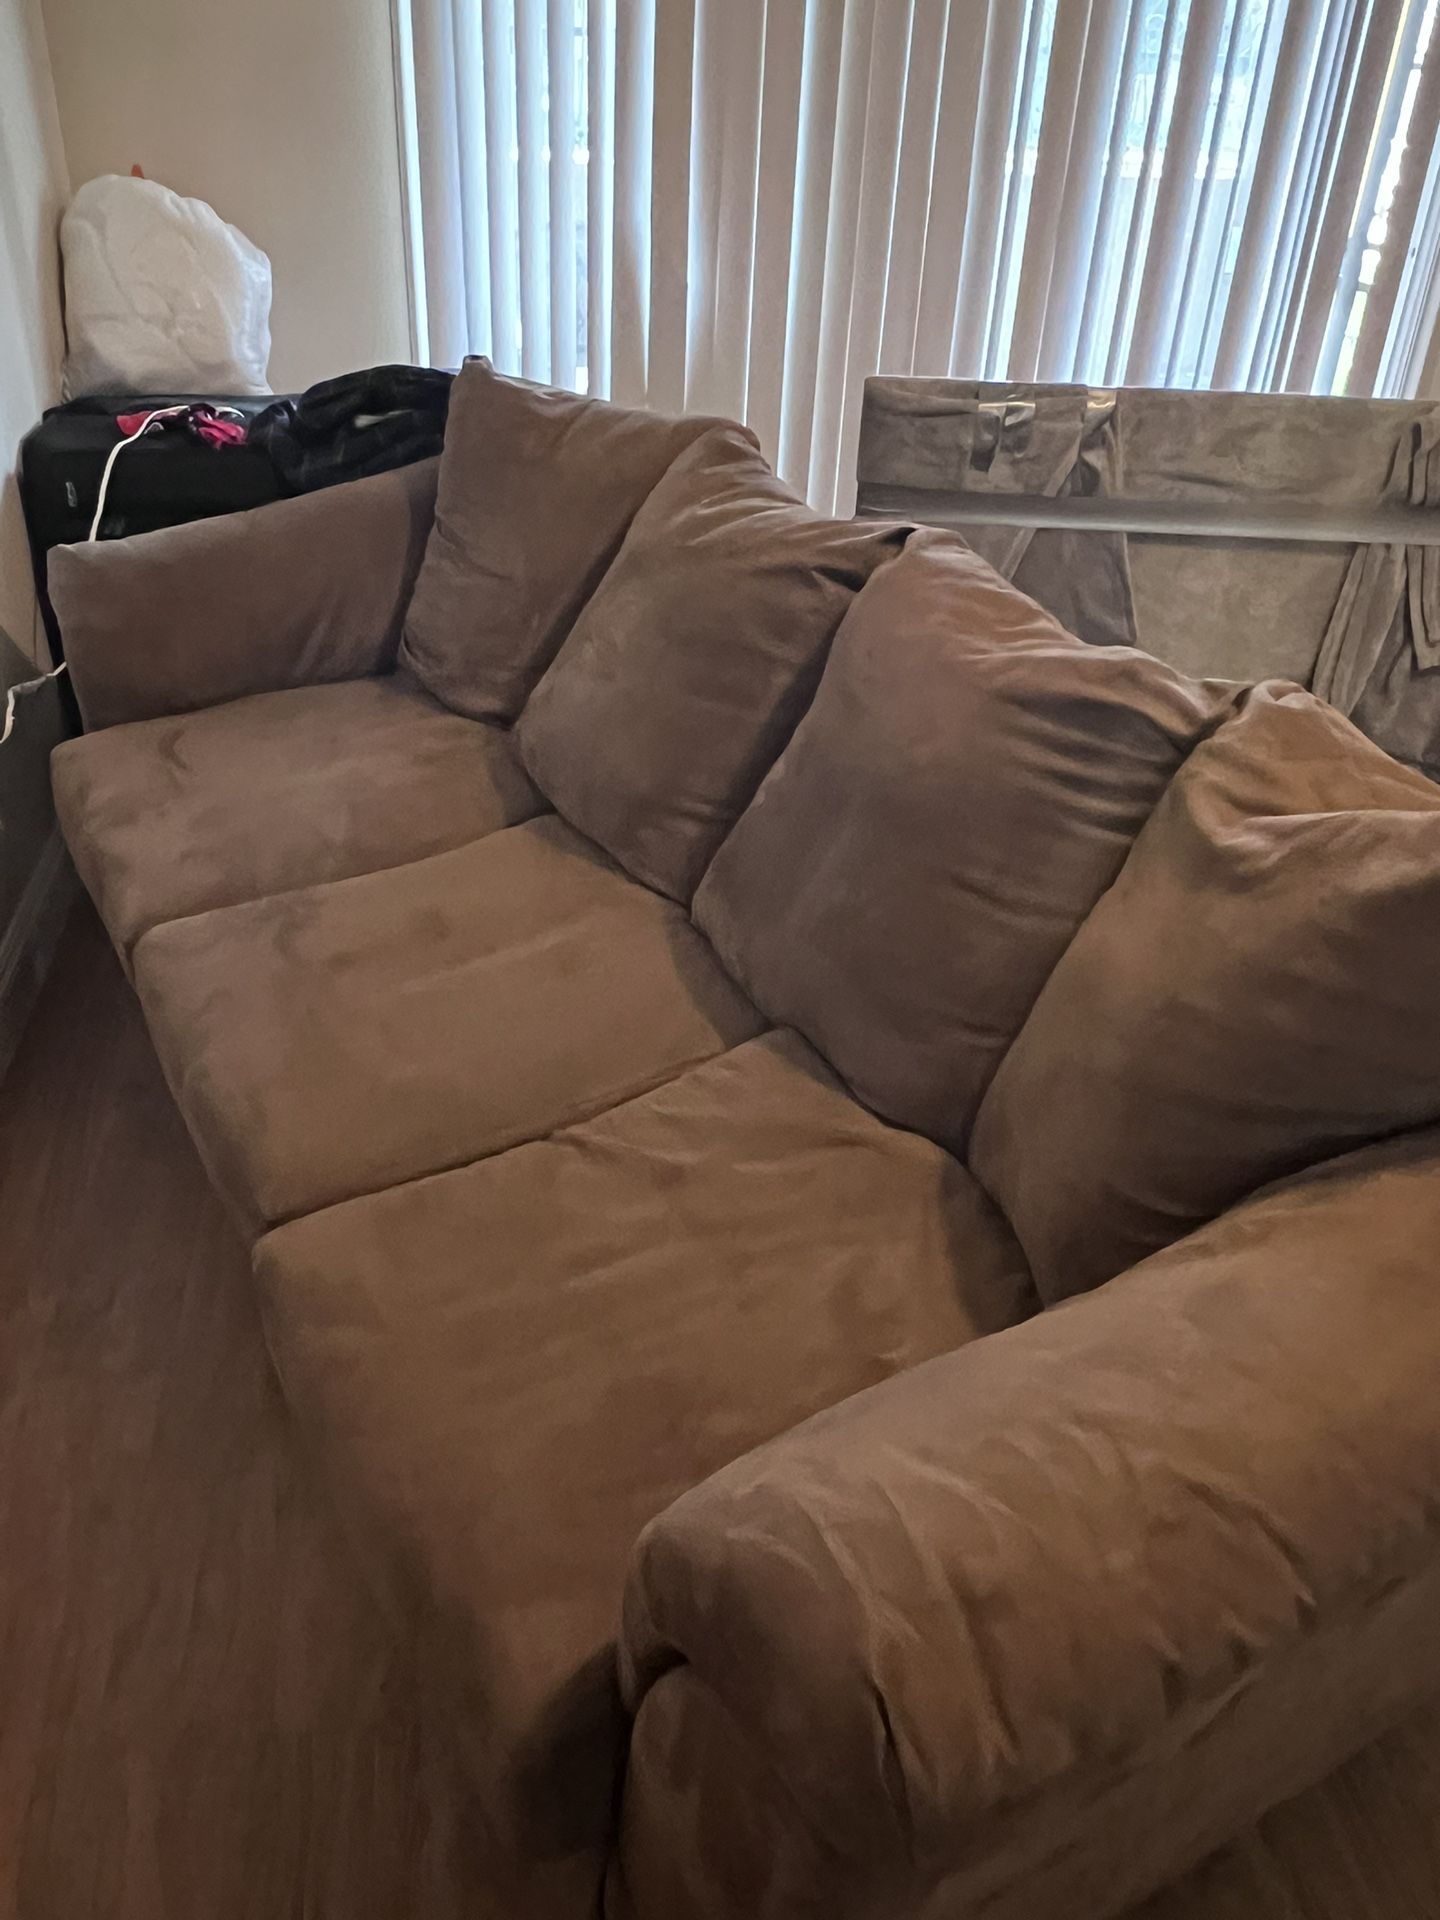 Couch With Full Size Pull Out Bed & Recliner For Sale $250